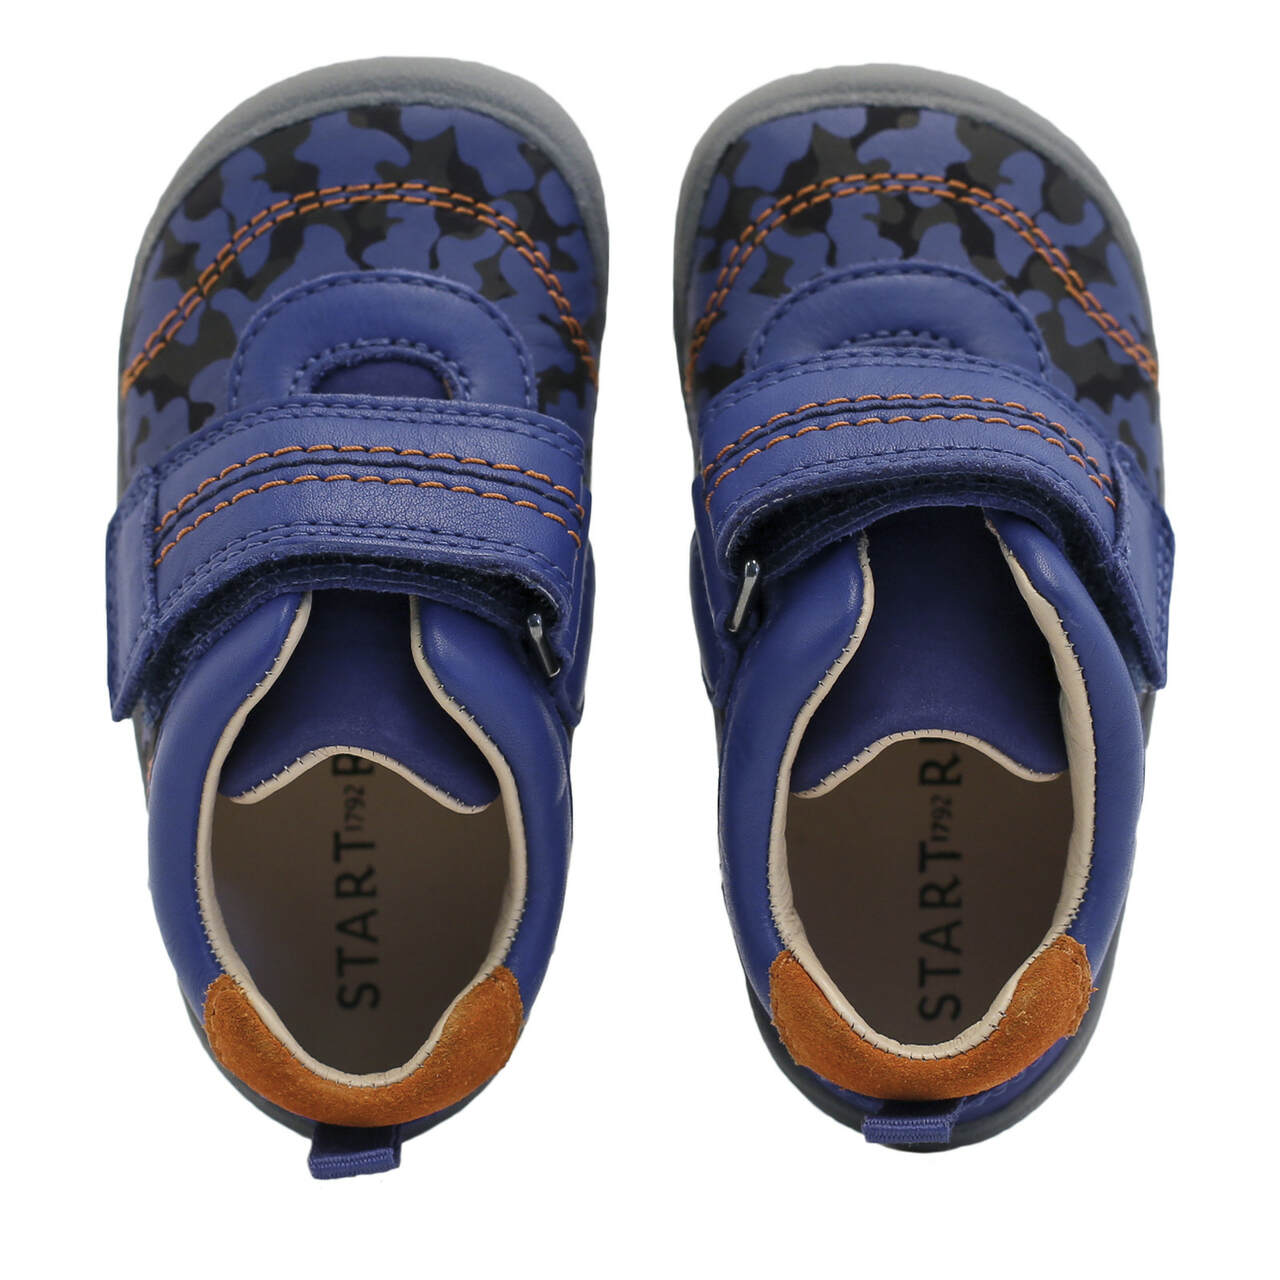 StartRite Hide 0788_2 Boys Bright Blue Leather Touch Fastening First Shoes